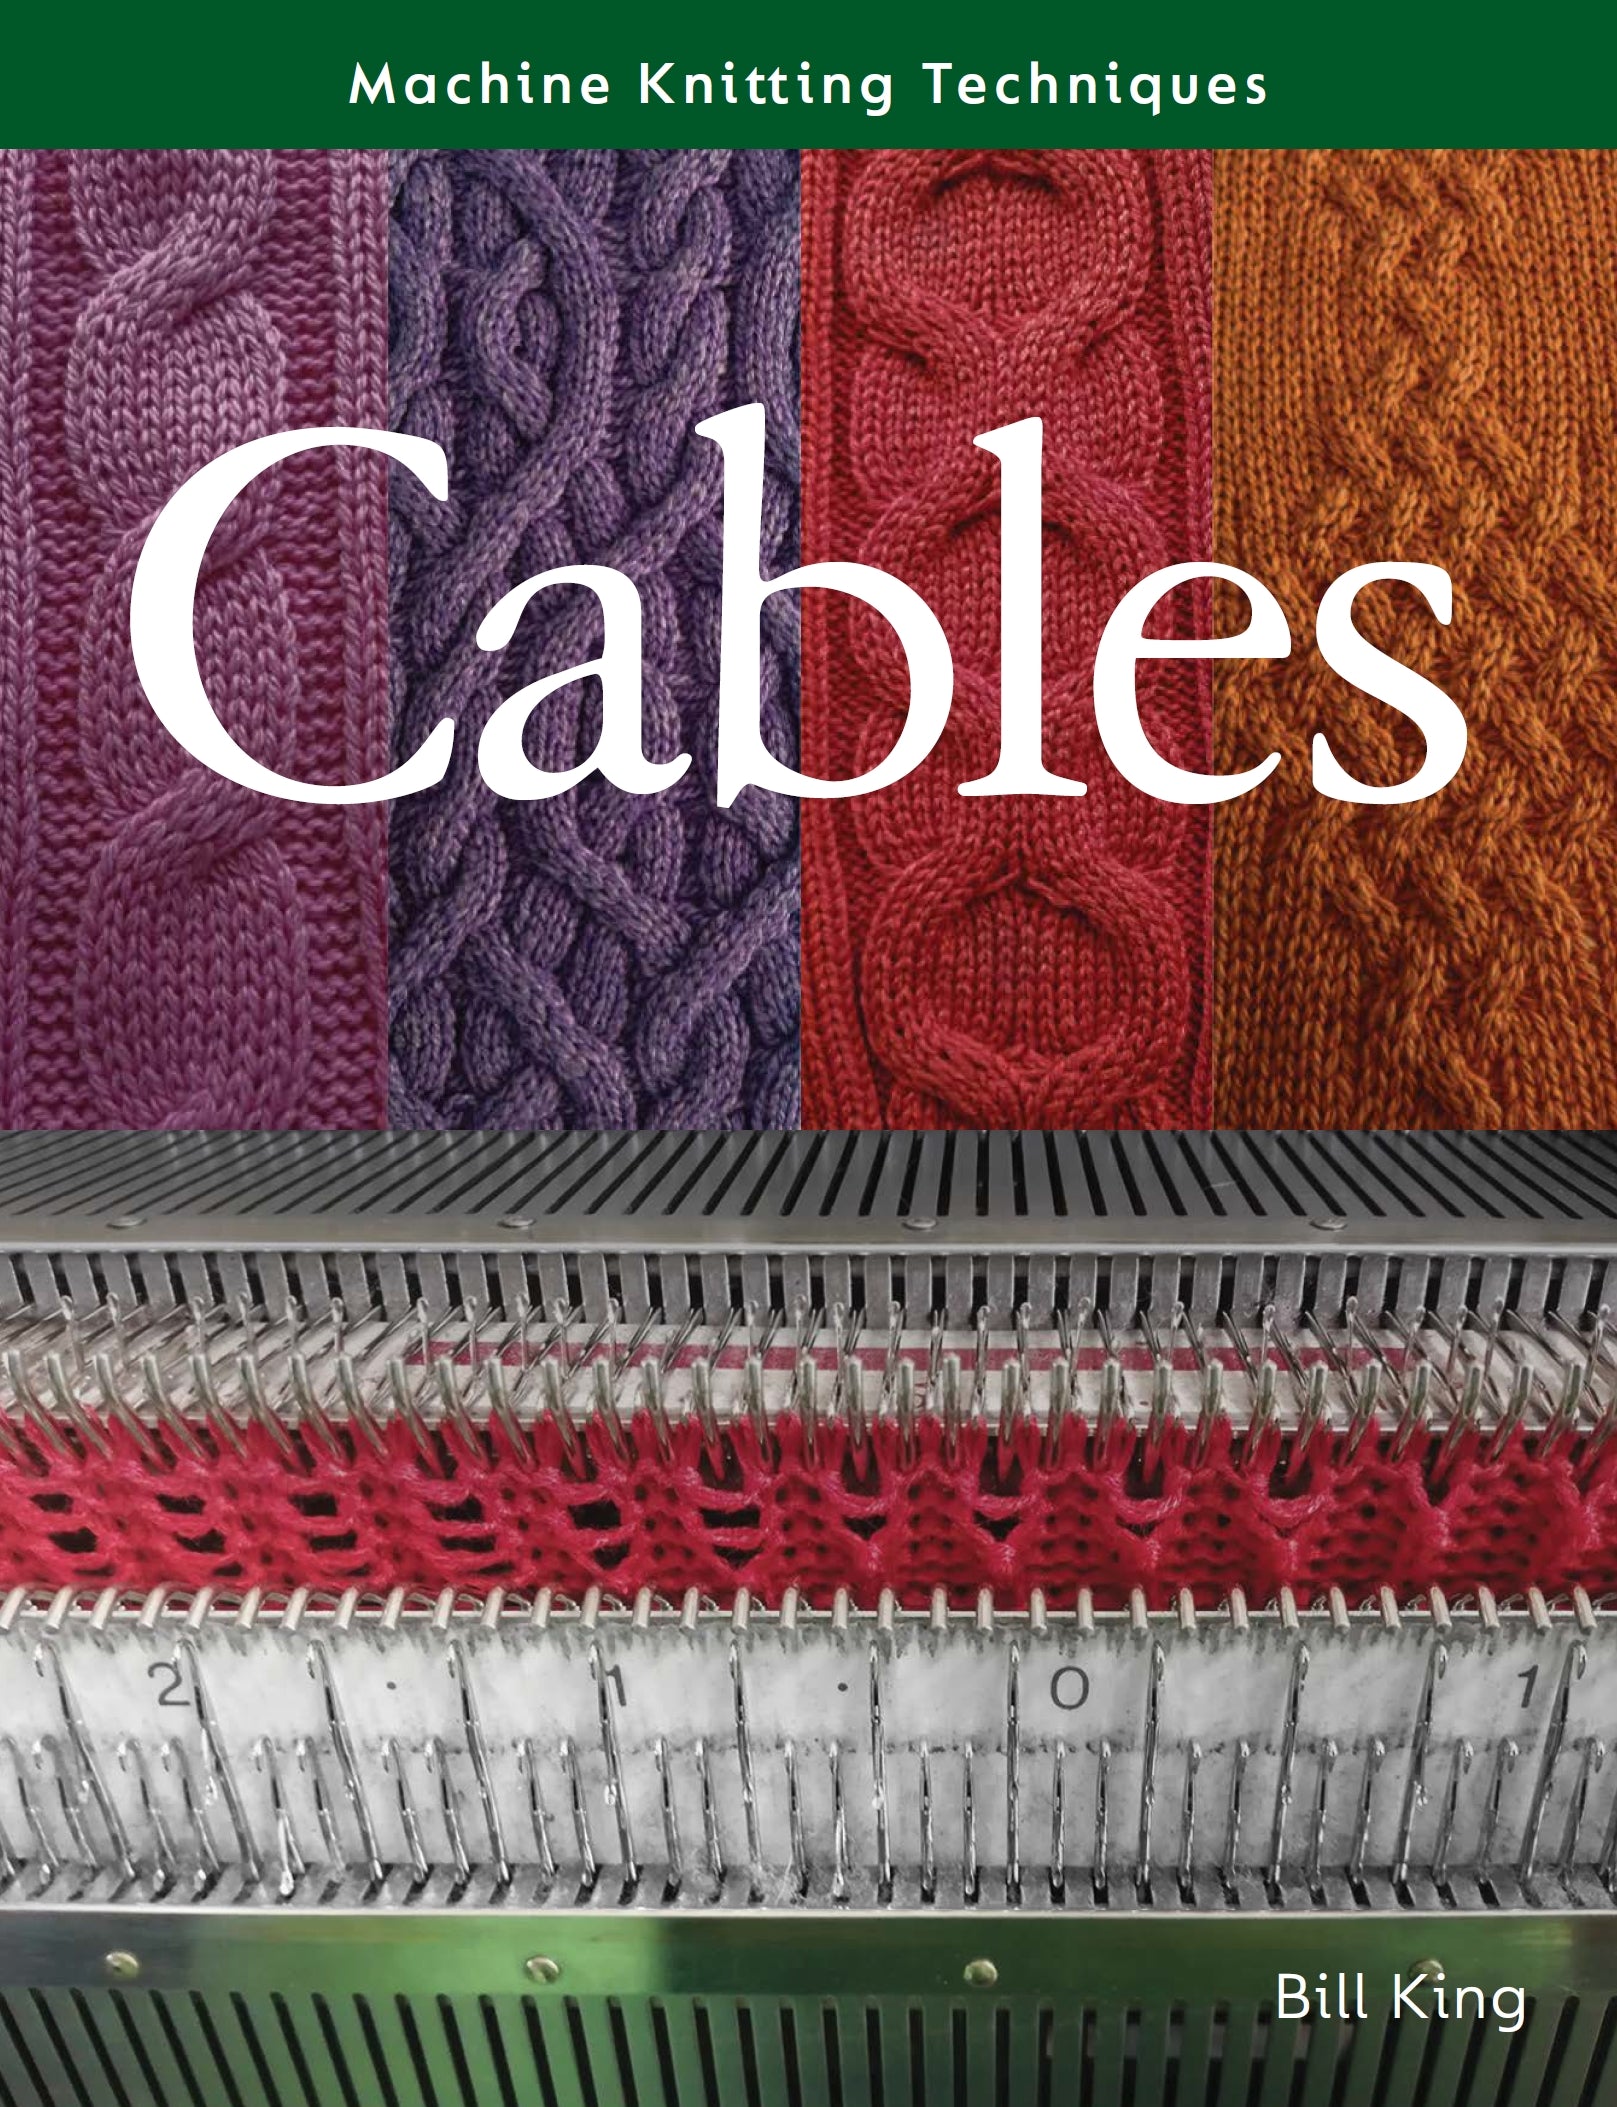 Machine Knitting Techniques: Cables